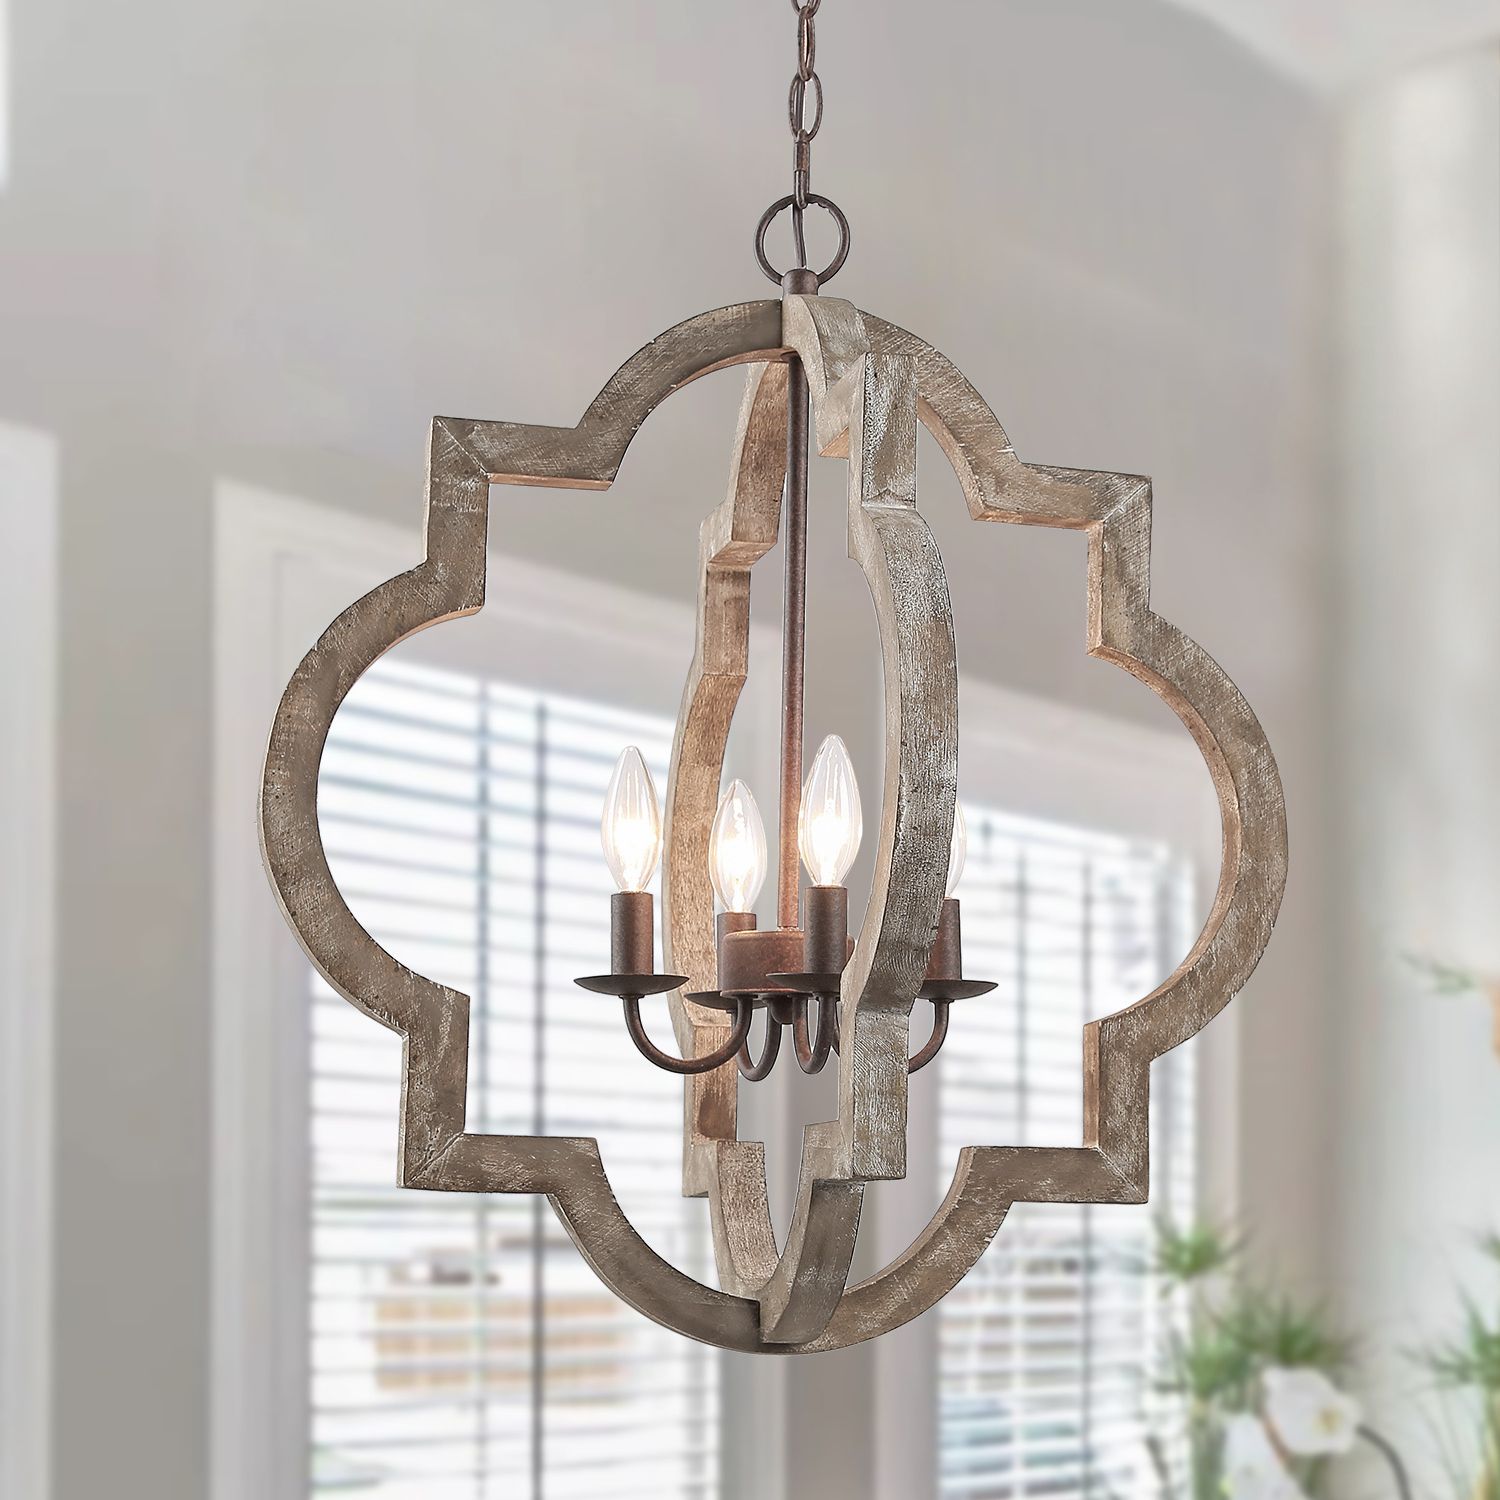 Lnc Farmhouse Lantern Chandelier, Handmade Wood 4 Light Fixtures Hanging  For Dining,living Room – Walmart Intended For Most Recently Released Cream And Rusty Lantern Chandeliers (View 9 of 10)